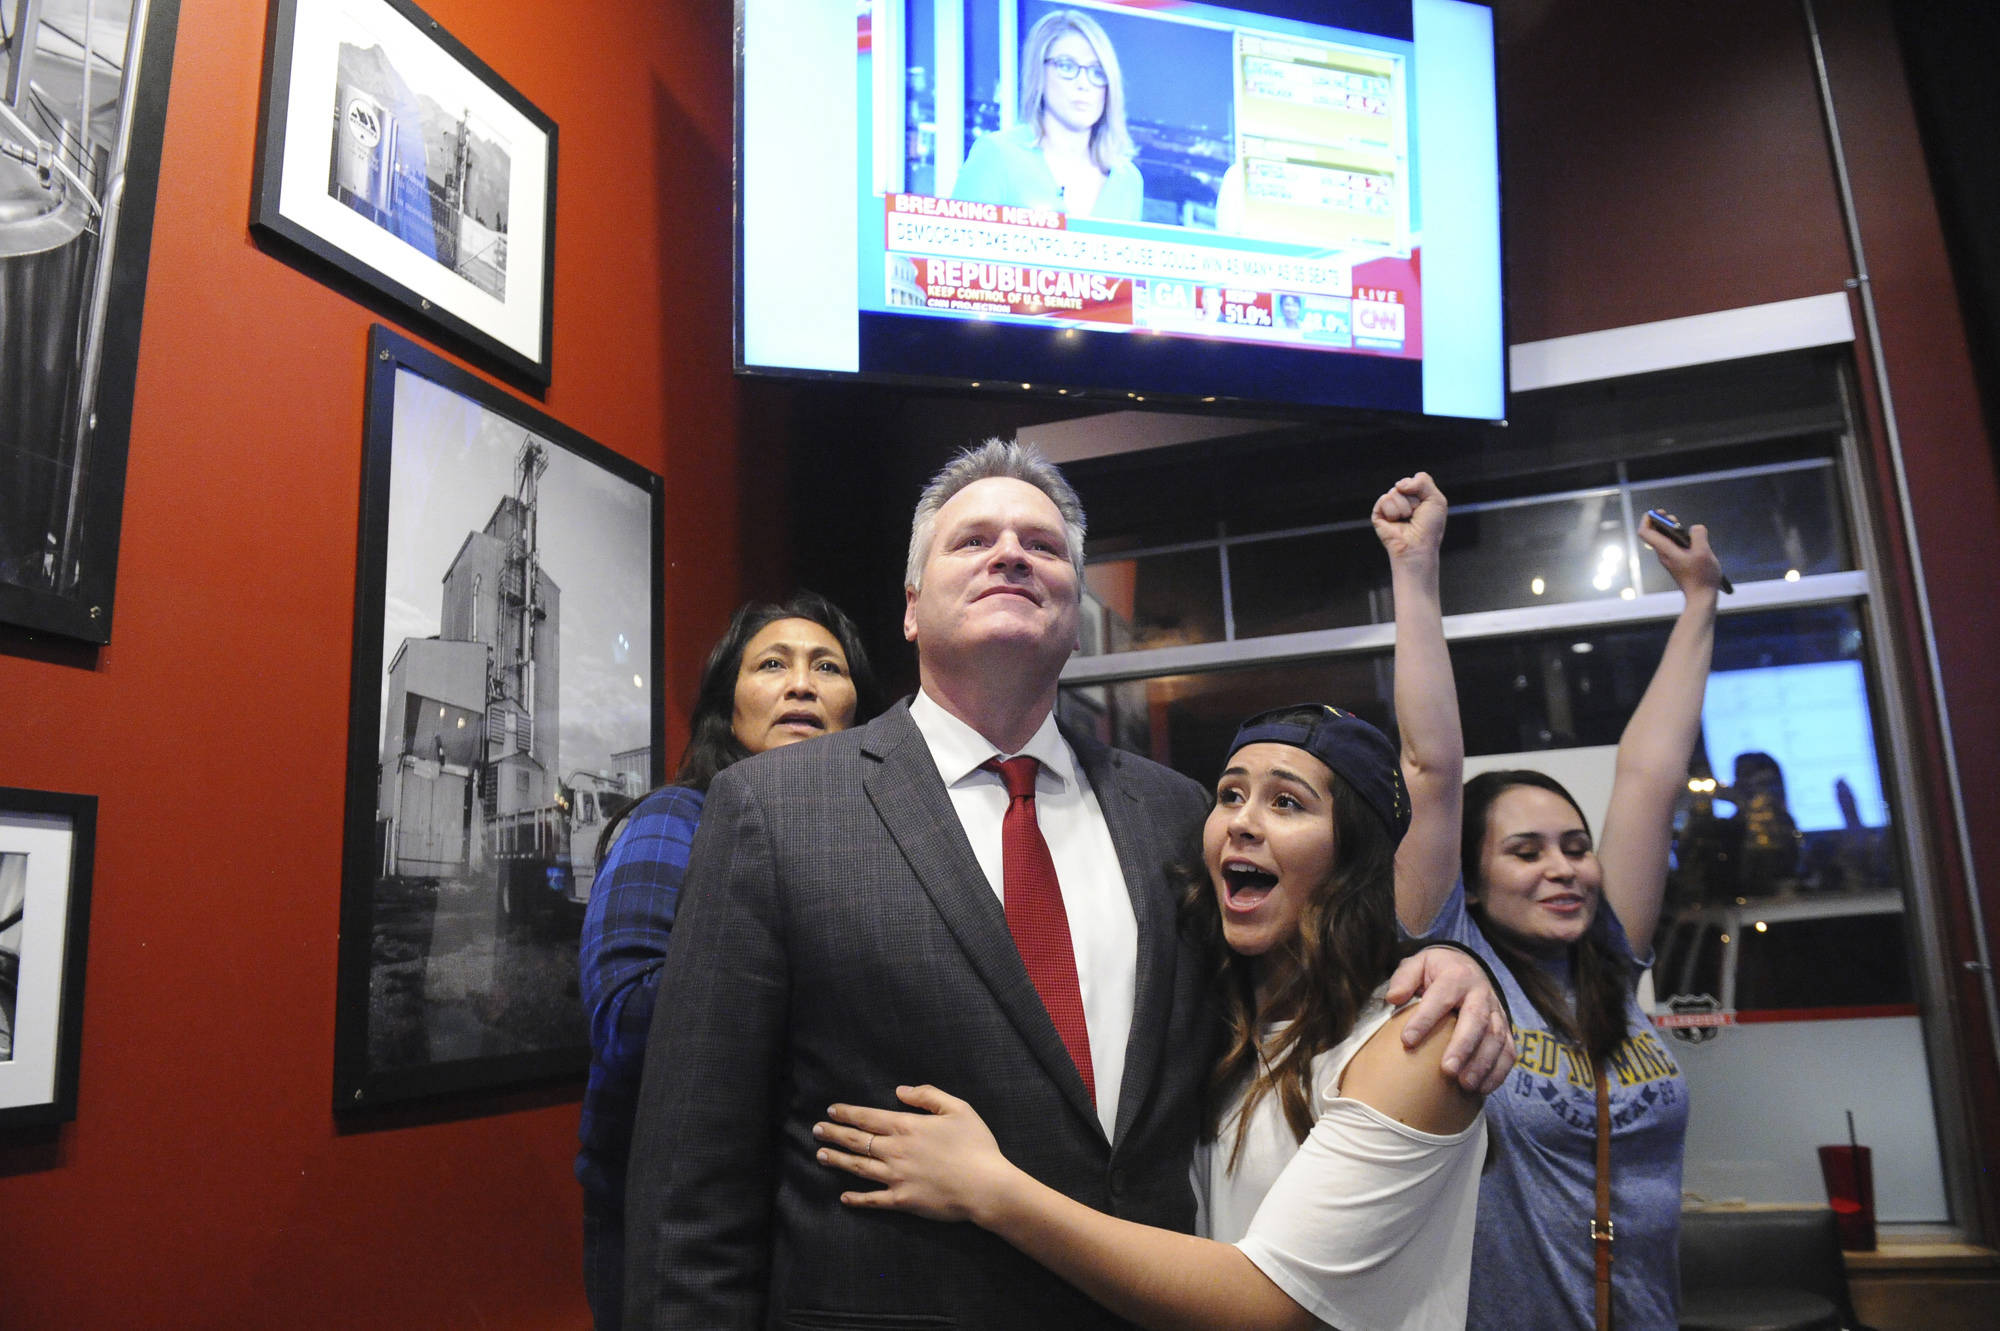 Republican gubernatorial candidate Mike Dunleavy reacts to early favorable election returns on Nov. 6, 2018 in Anchorage. With Dunleavy are from left, his wife Rose and daughters Ceil and Maggie. (Michael Dinneen | Associated Press)